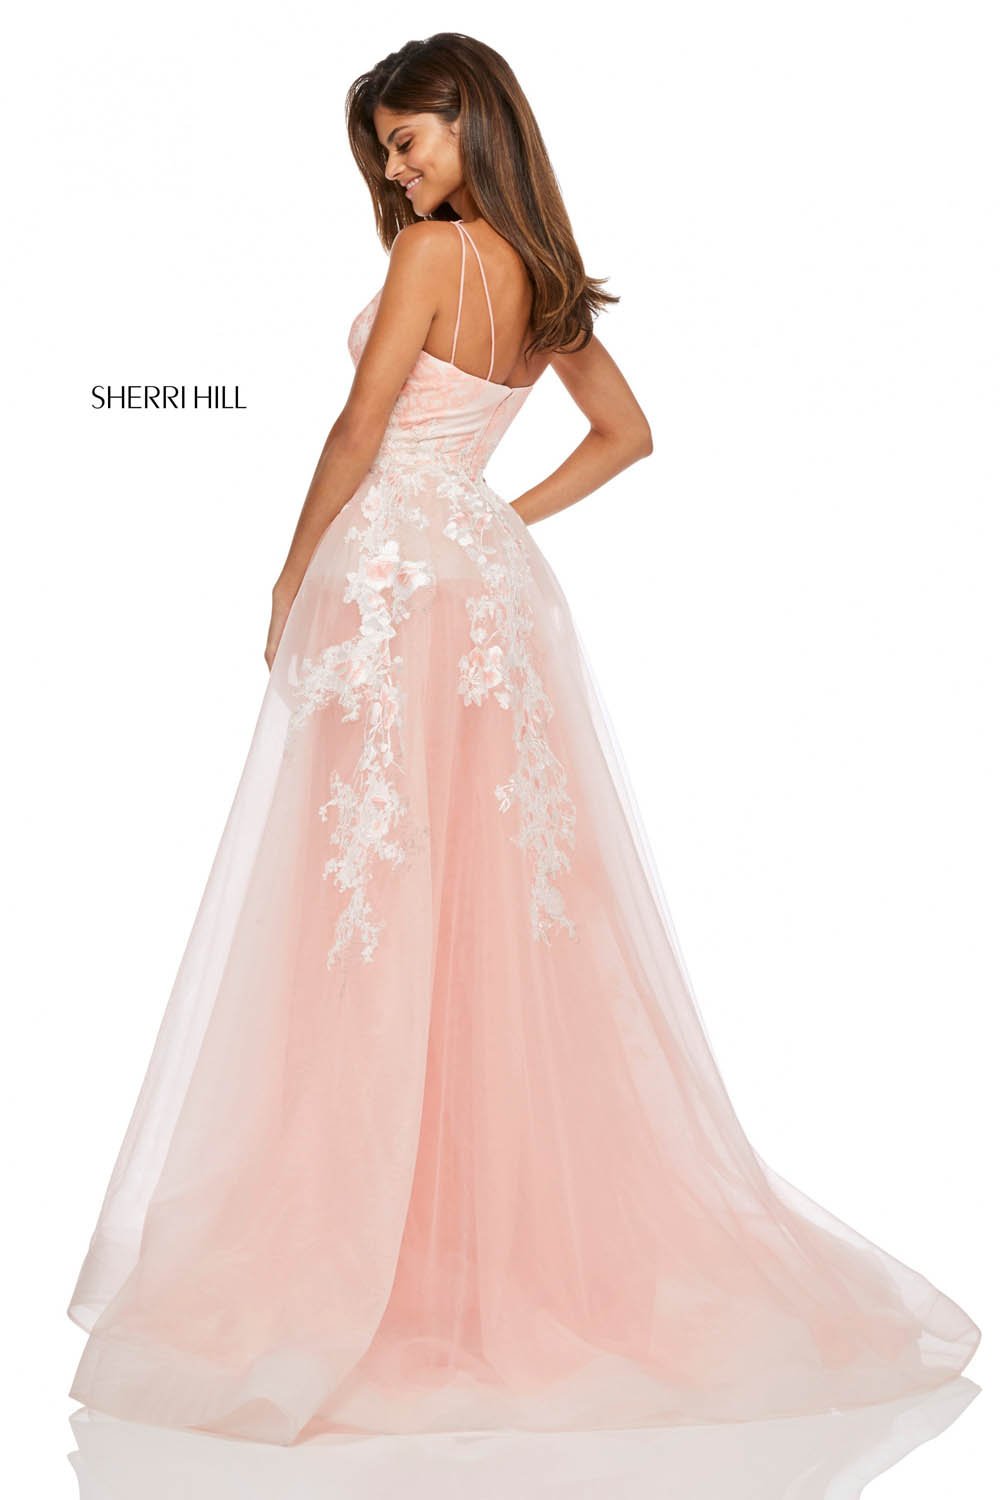 Sherri Hill 52660 dress images in these colors: Coral, Ivory.